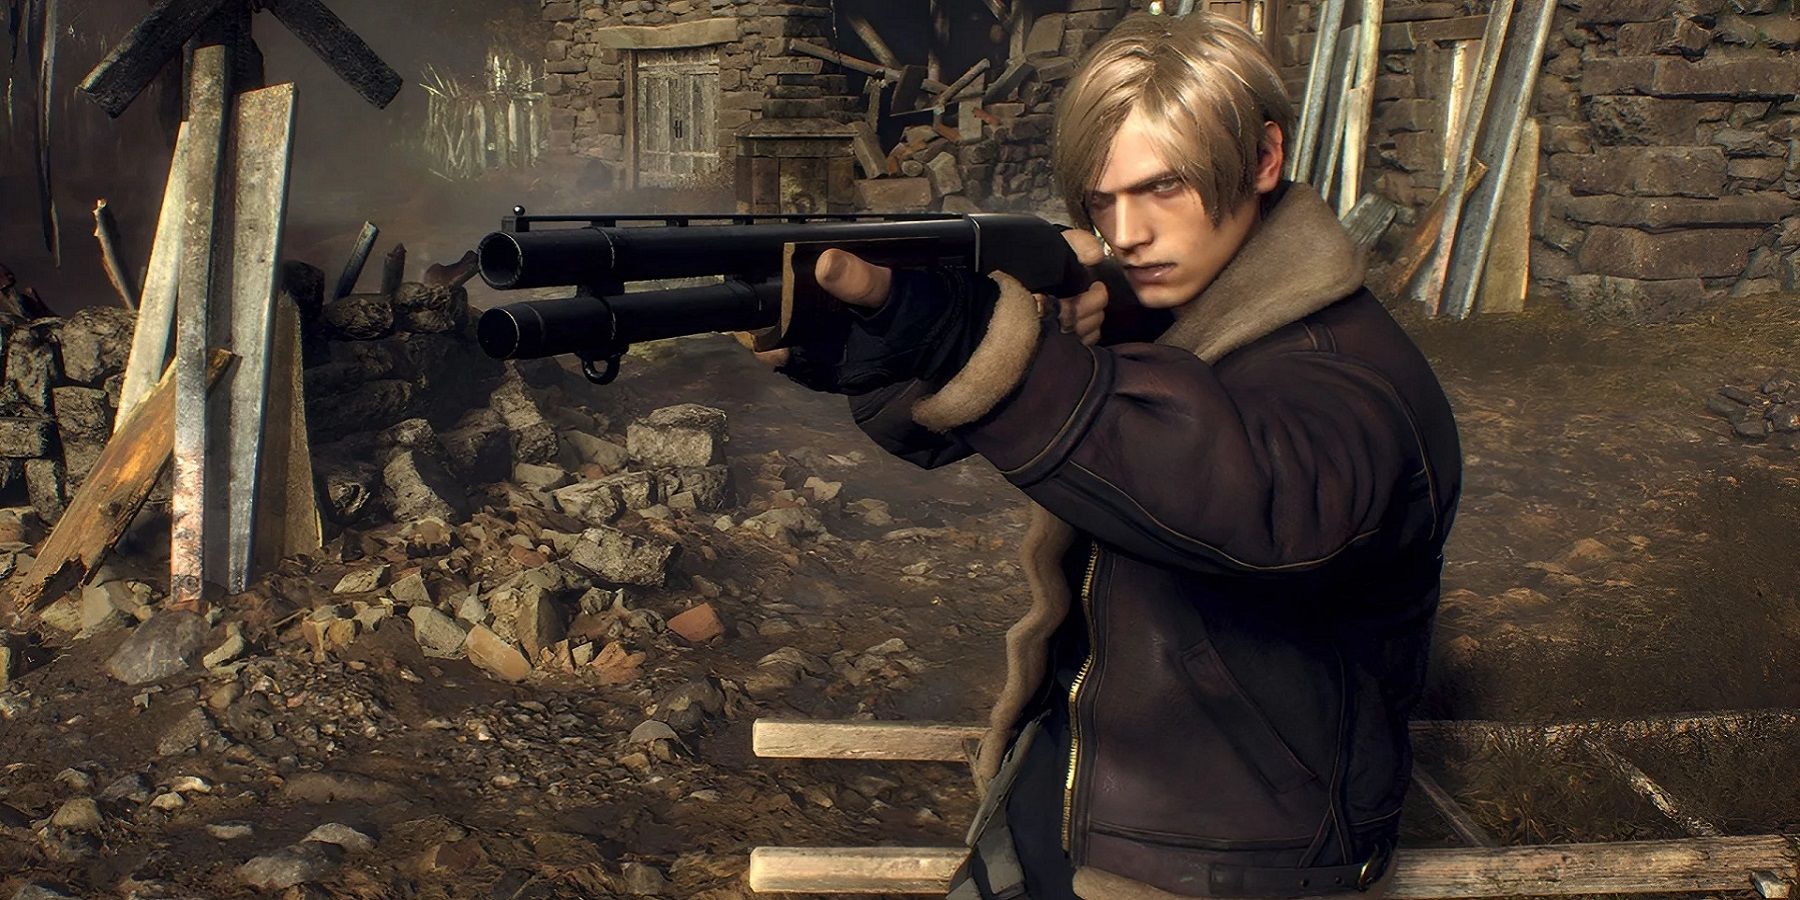 Resident Evil 4 remake to launch on PS4, leaving Xbox One in the